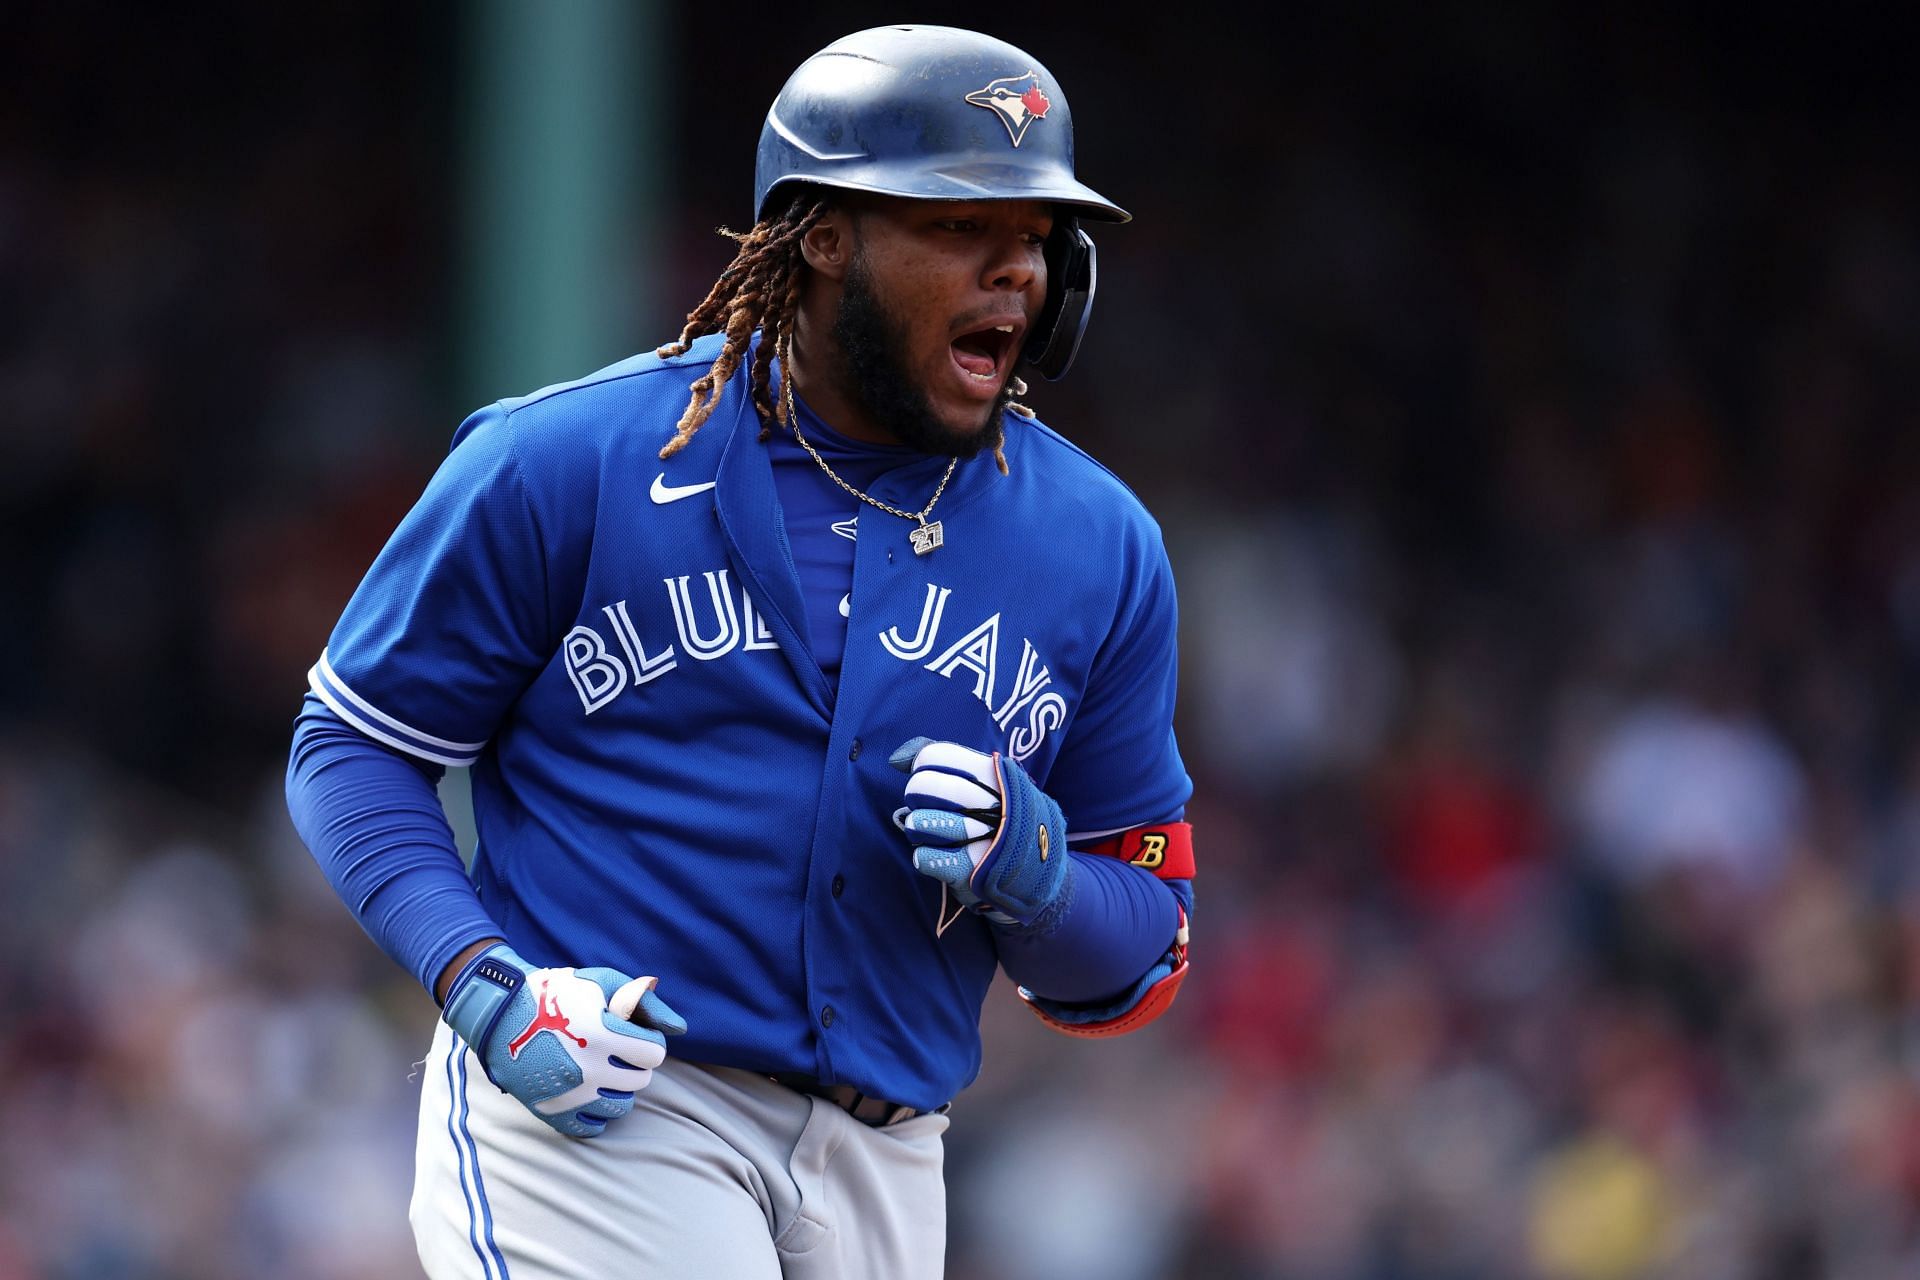 Vladimir Guerrero Jr. and the Toronto Blue Jays will face the Boston Red Sox Wednesday.